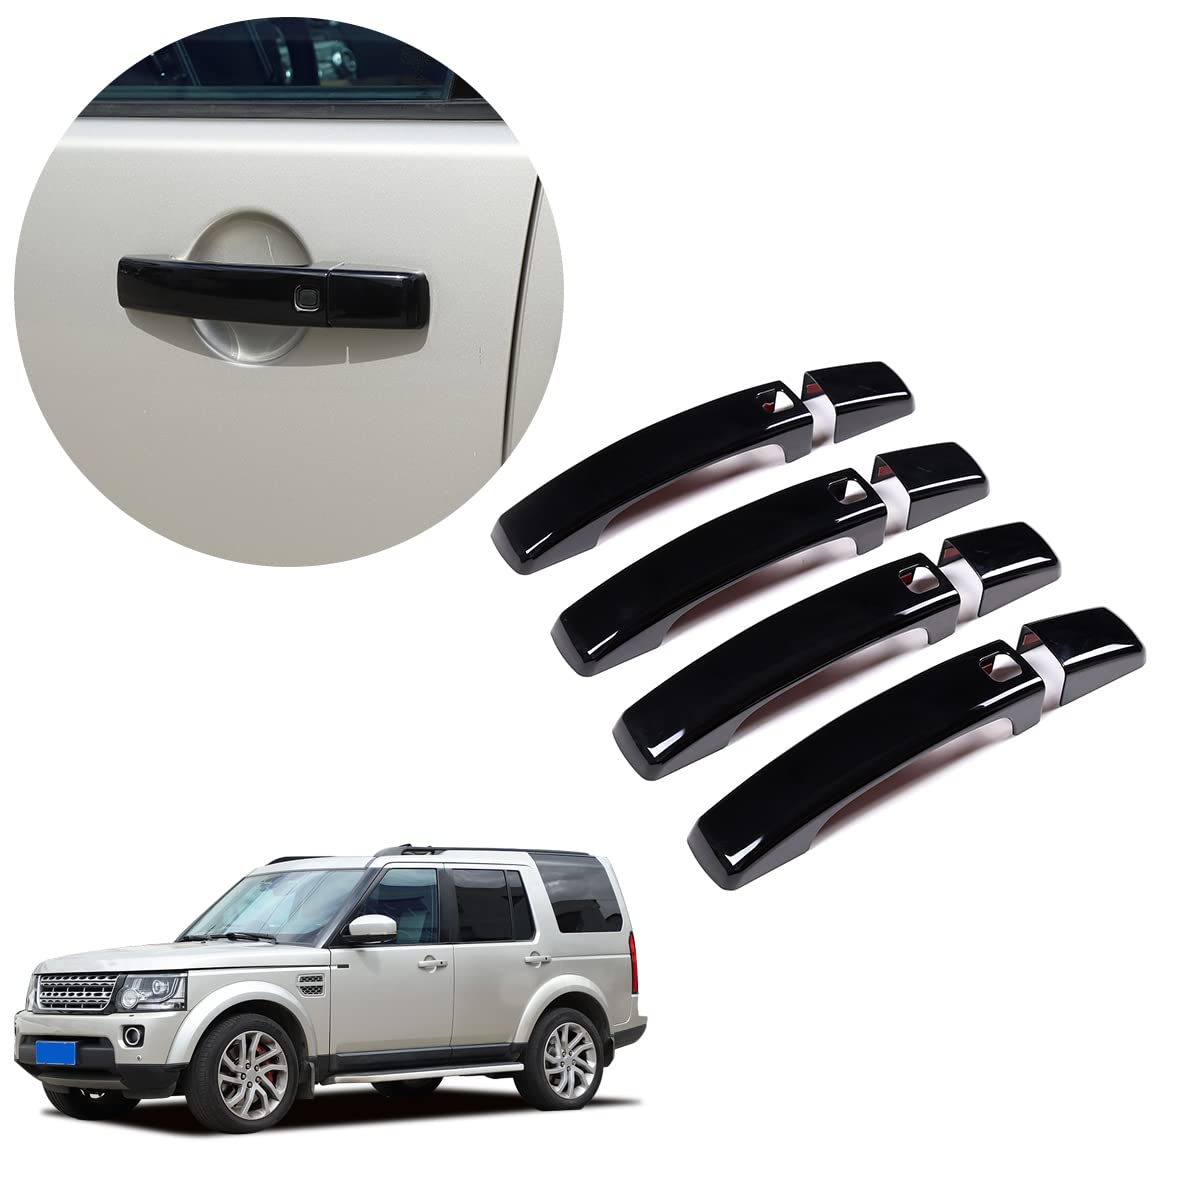 Gloss Black Door Handle Cover Trim for Land Rover Range Rover Sport 2010-2013 / Discovery 4 LR4 2009-2016 with 4 Smart Keyhole